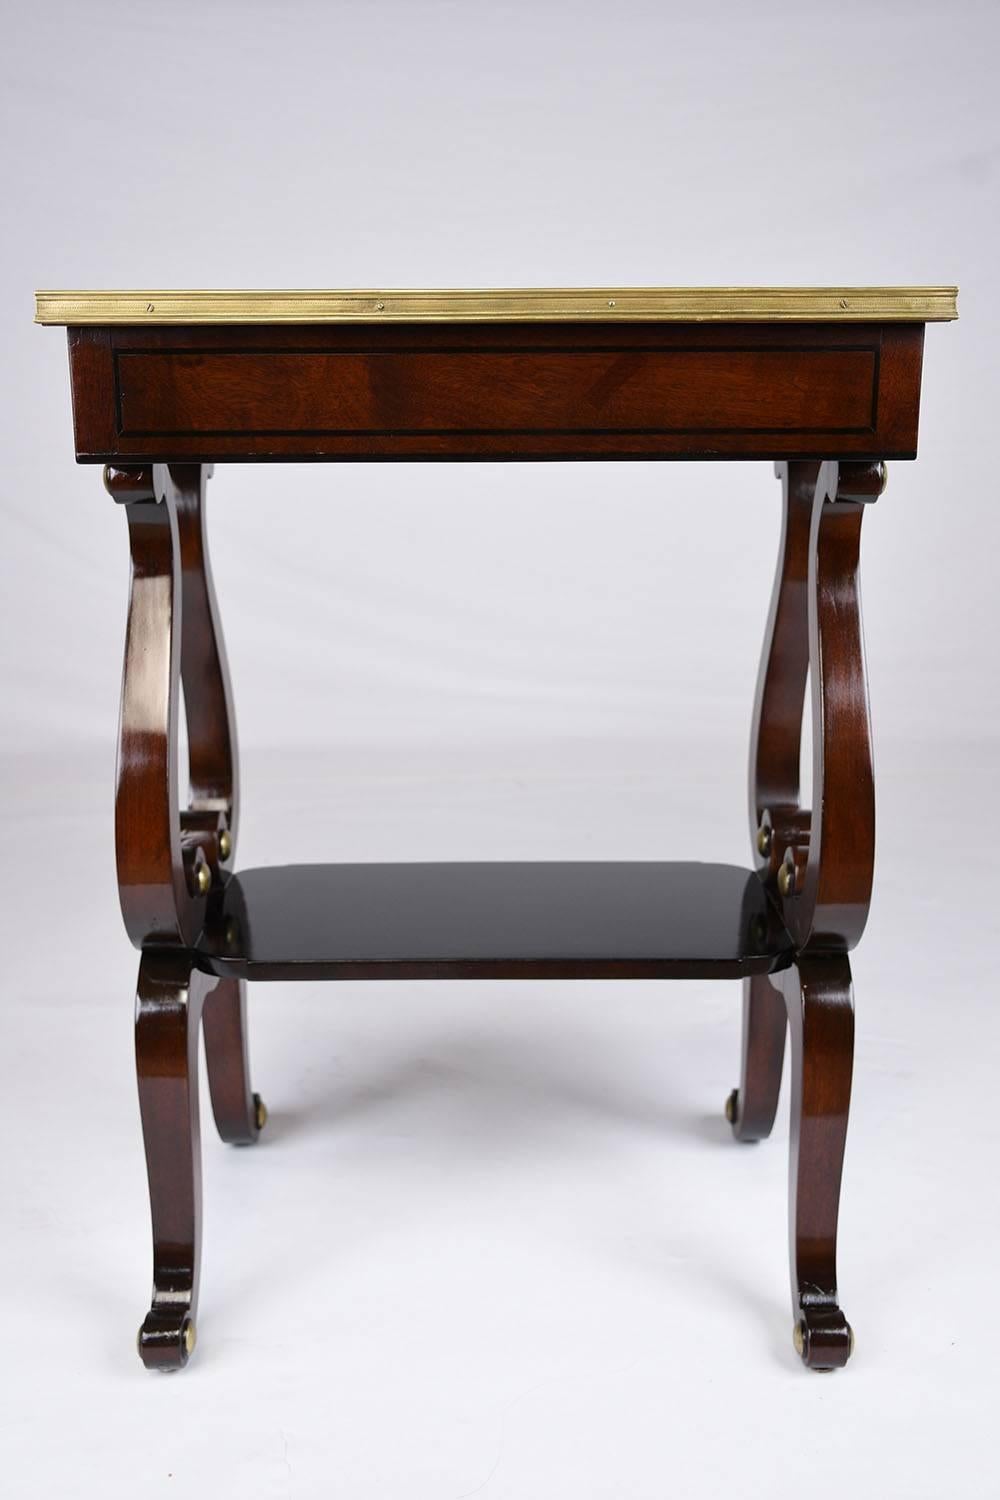 20th Century Pair of English Regency Style Side Tables